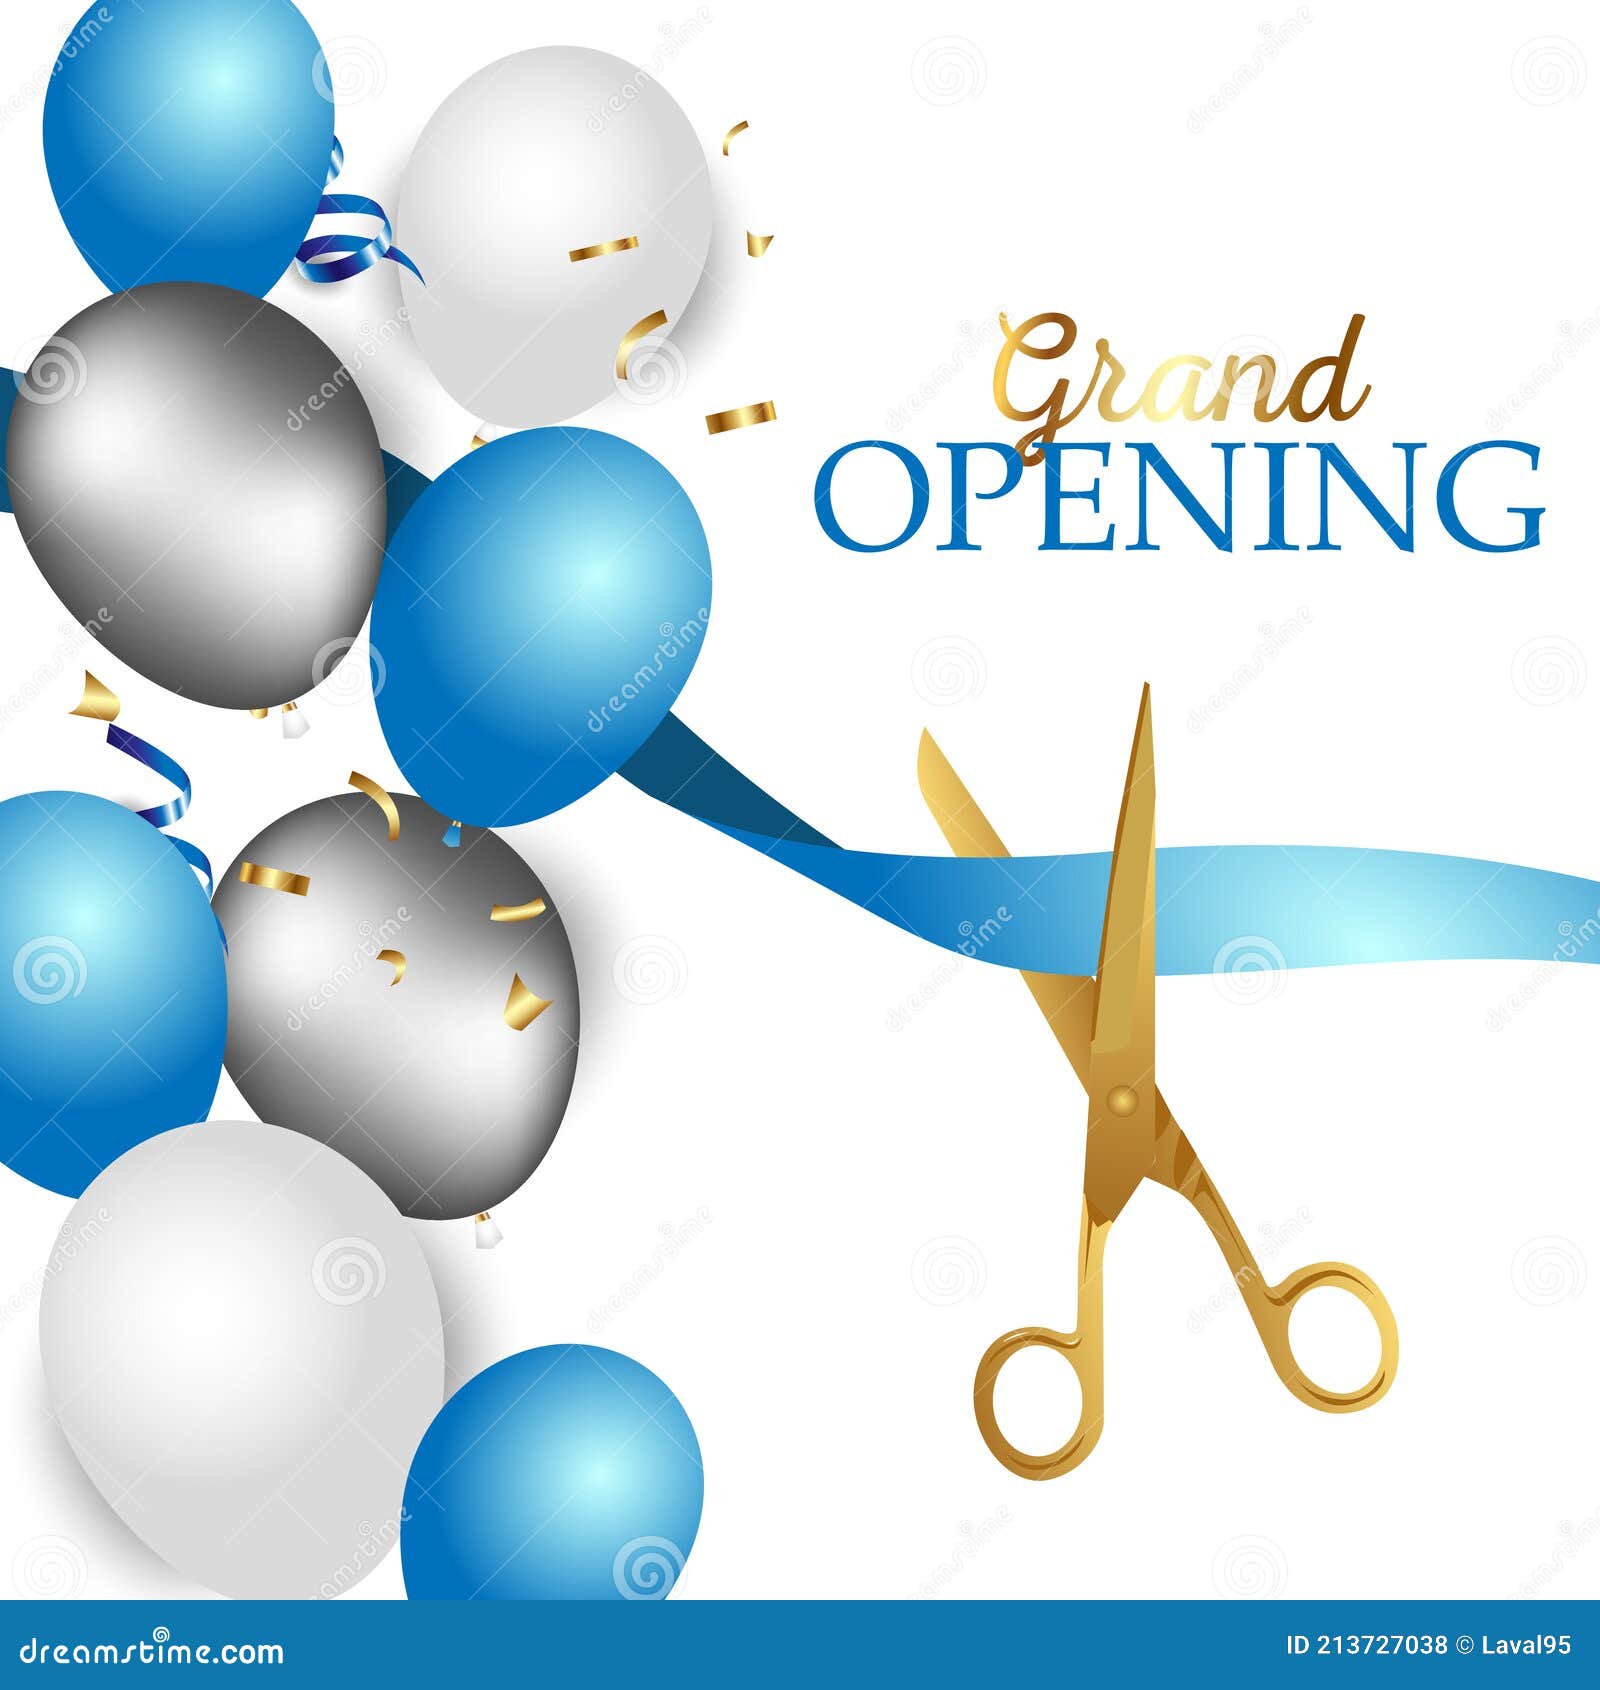 Grand Opening Design With Ribbon Balloons And Gold Scissors